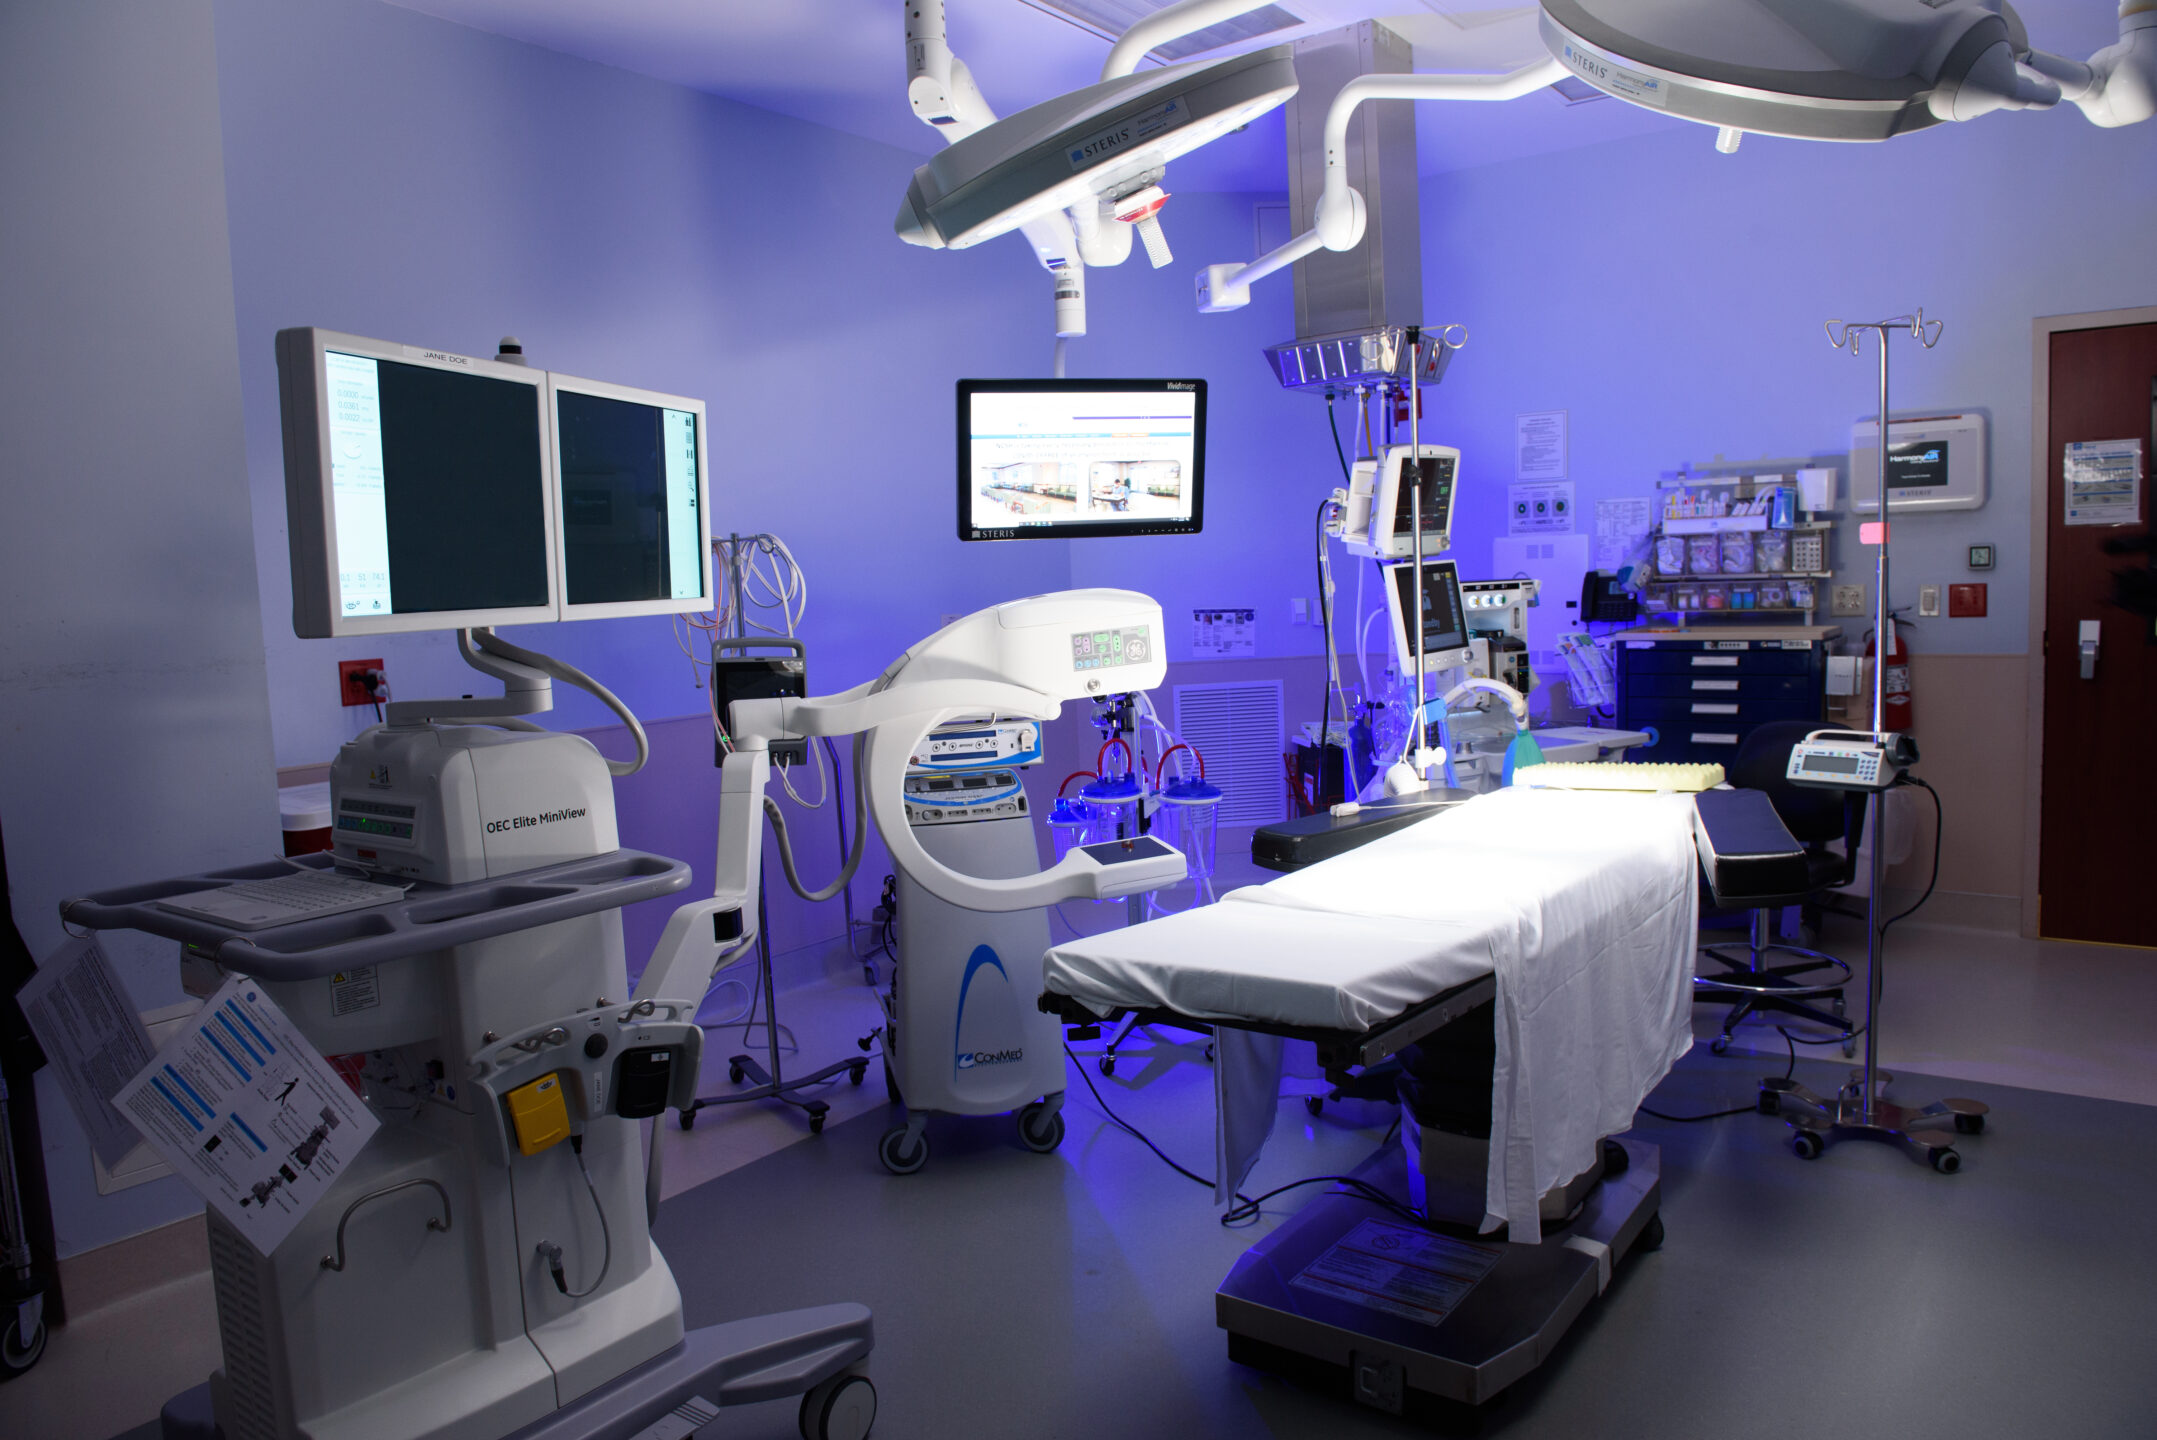 An image of the operating room is lit with blue light and shows a bed and surgical equipment.